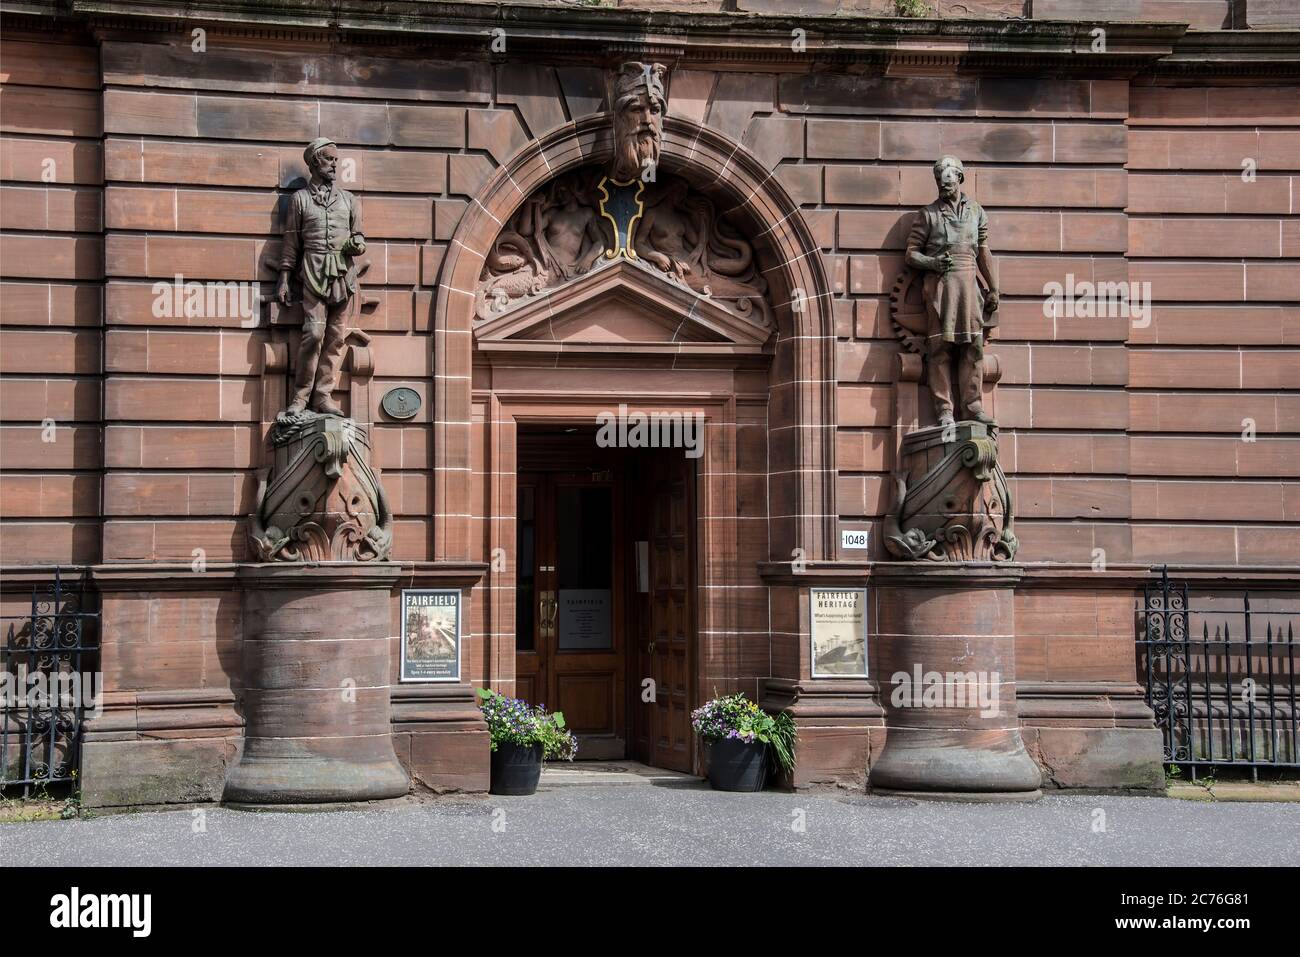 Two shipbuilding related statues at entrance to Fairfield Heritage, Govan, Glasgow. Stock Photo